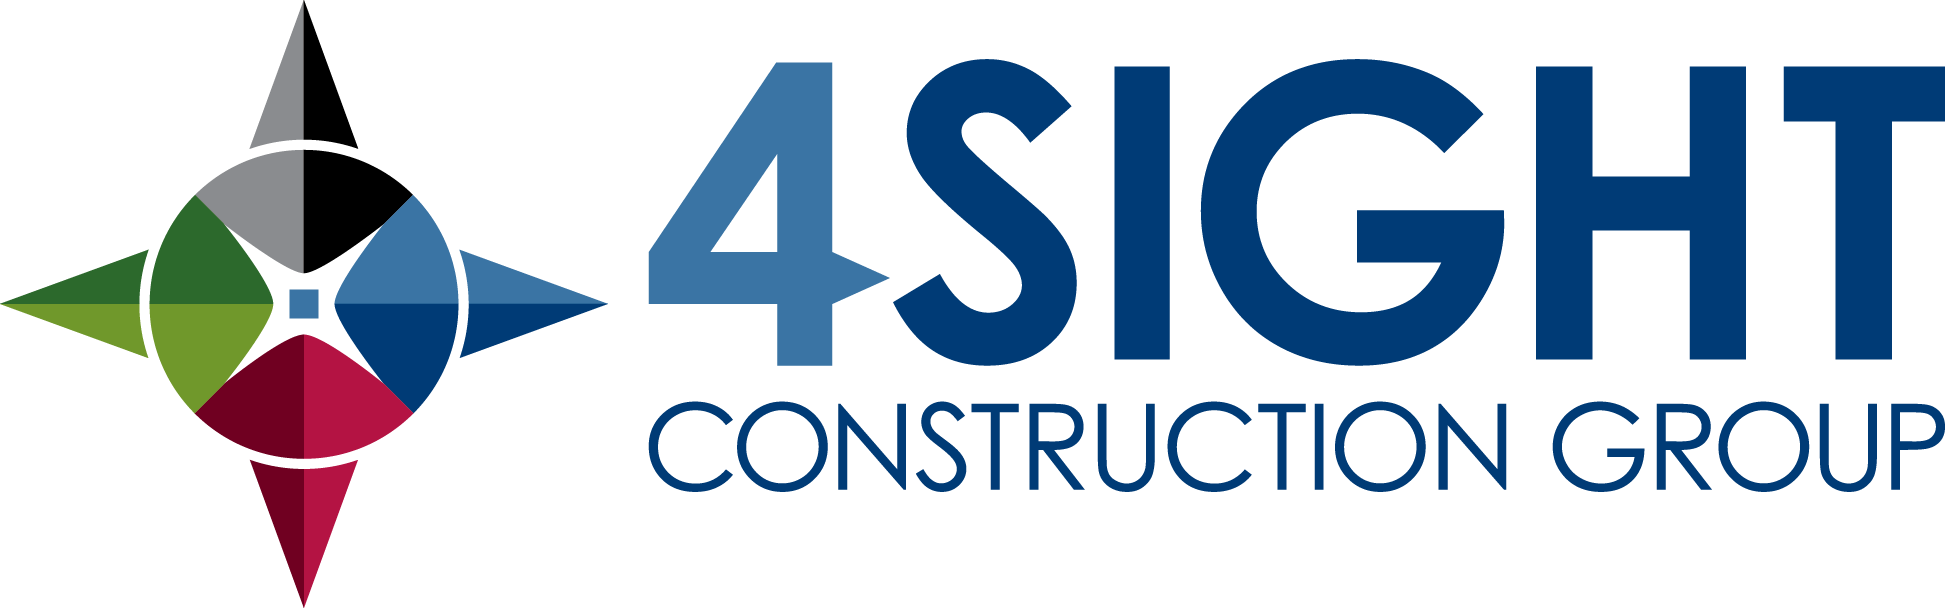 4 Sight Construction Group